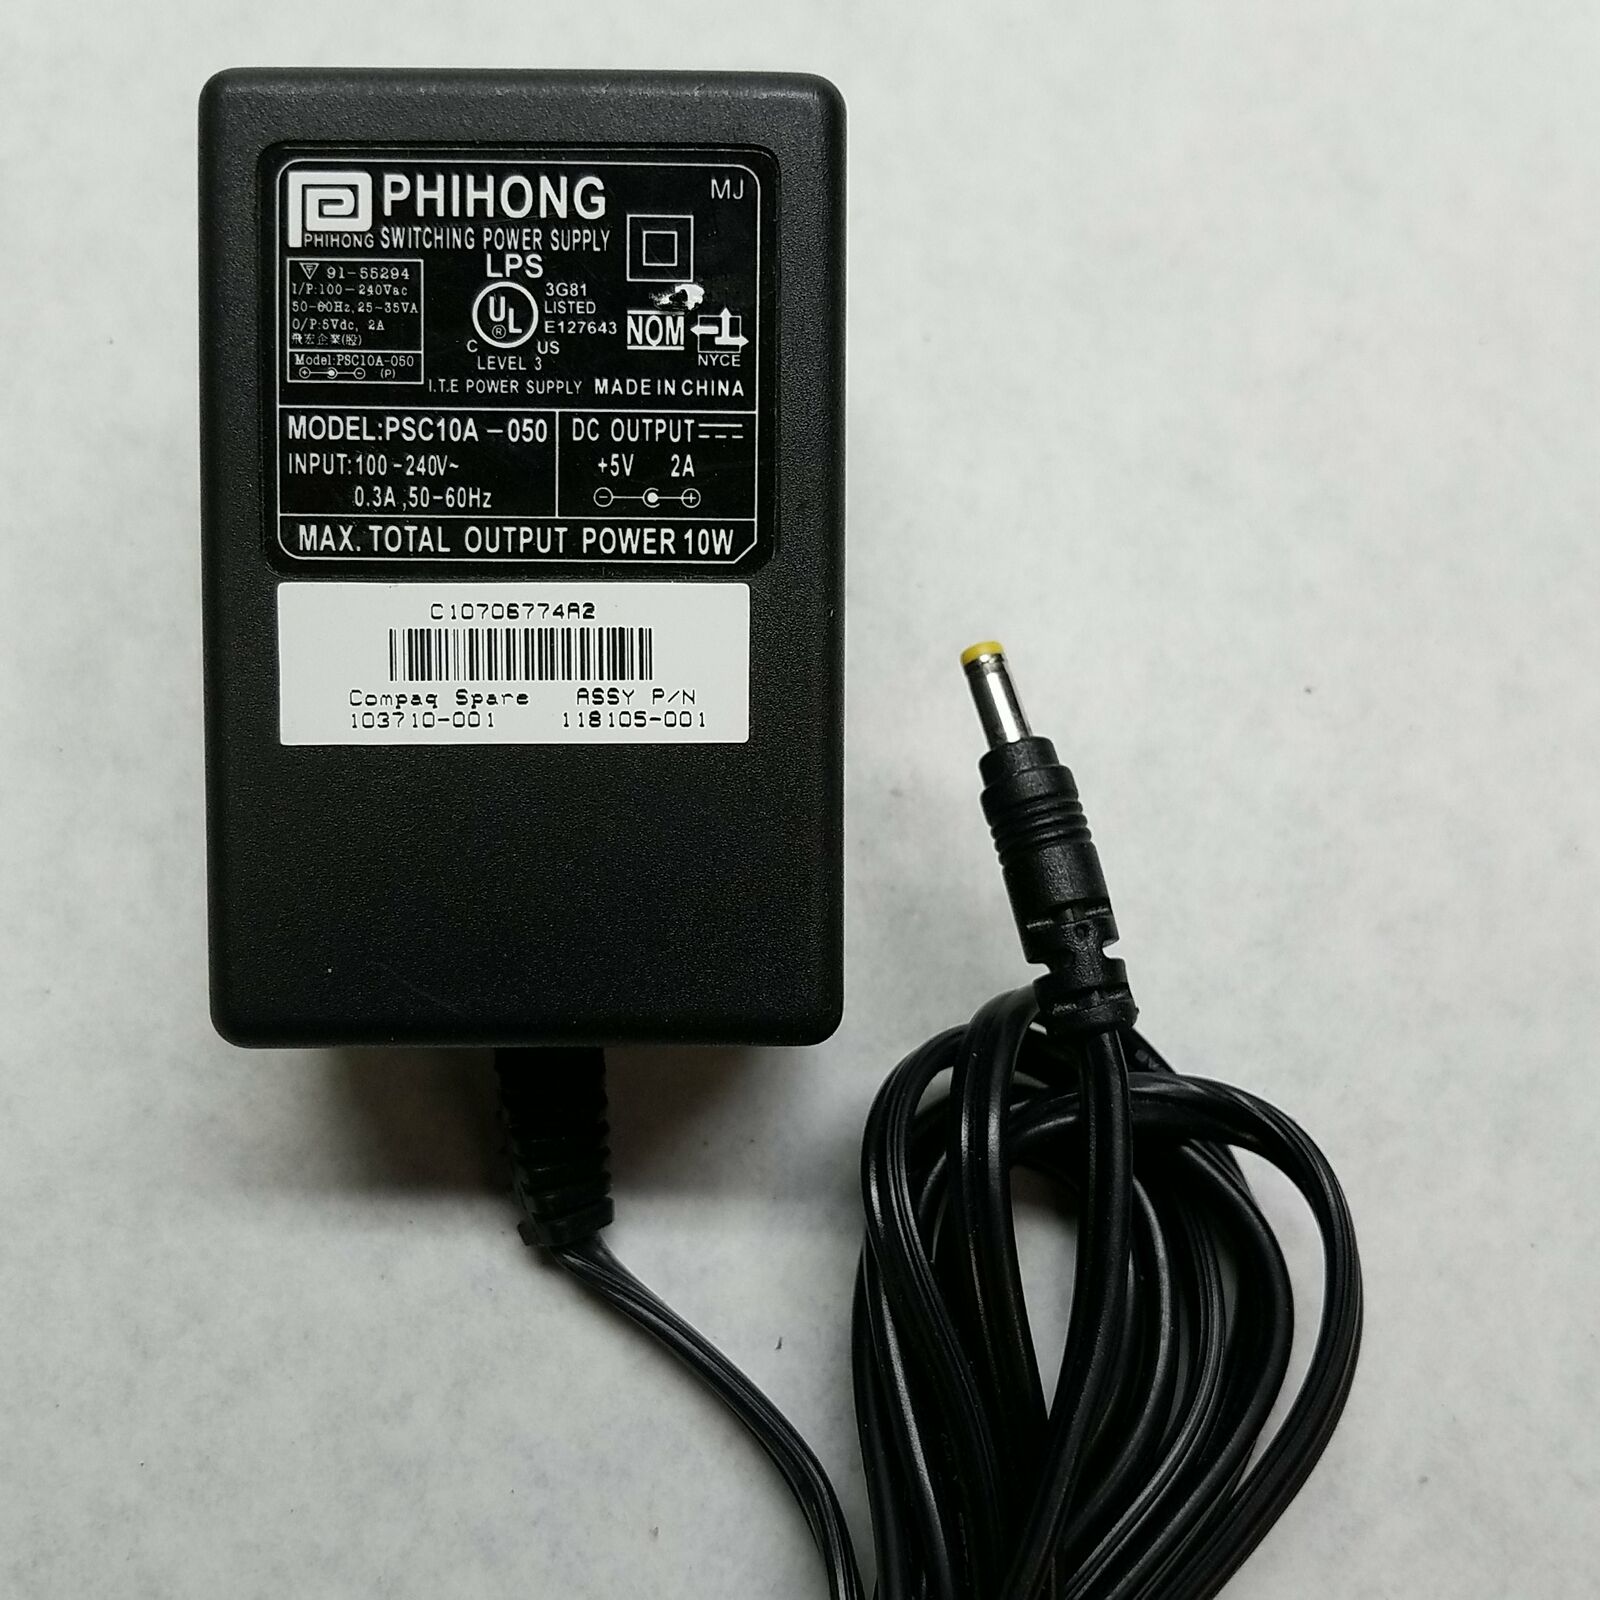 New Phihong PSC10A-050 118105-001 5V 2A Switching Power Supply ac adapter